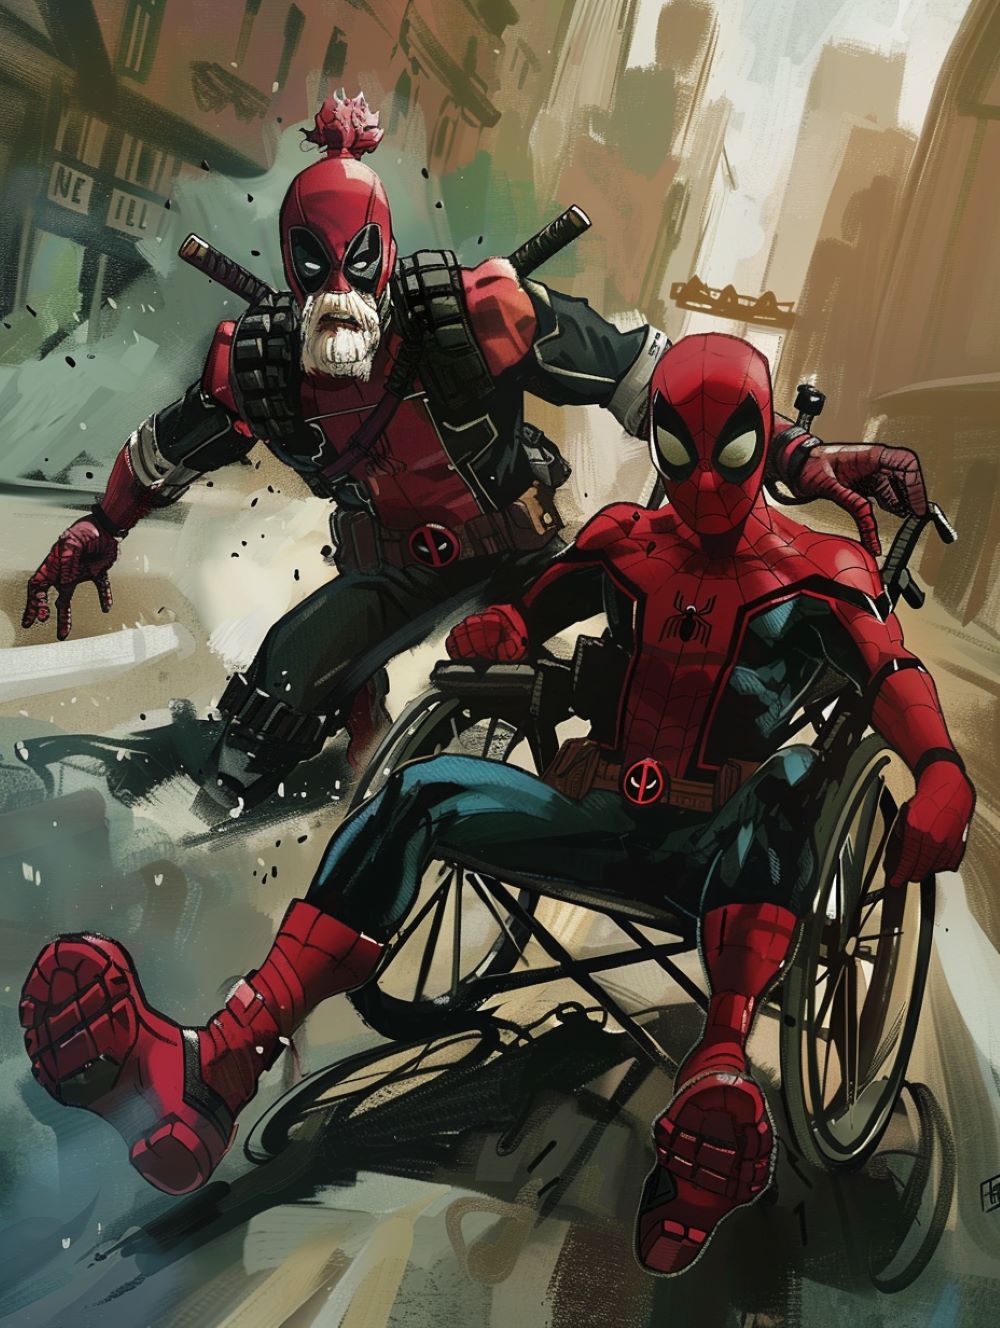 Spider-Man sits in a wheelchair while running with an old Deadpool